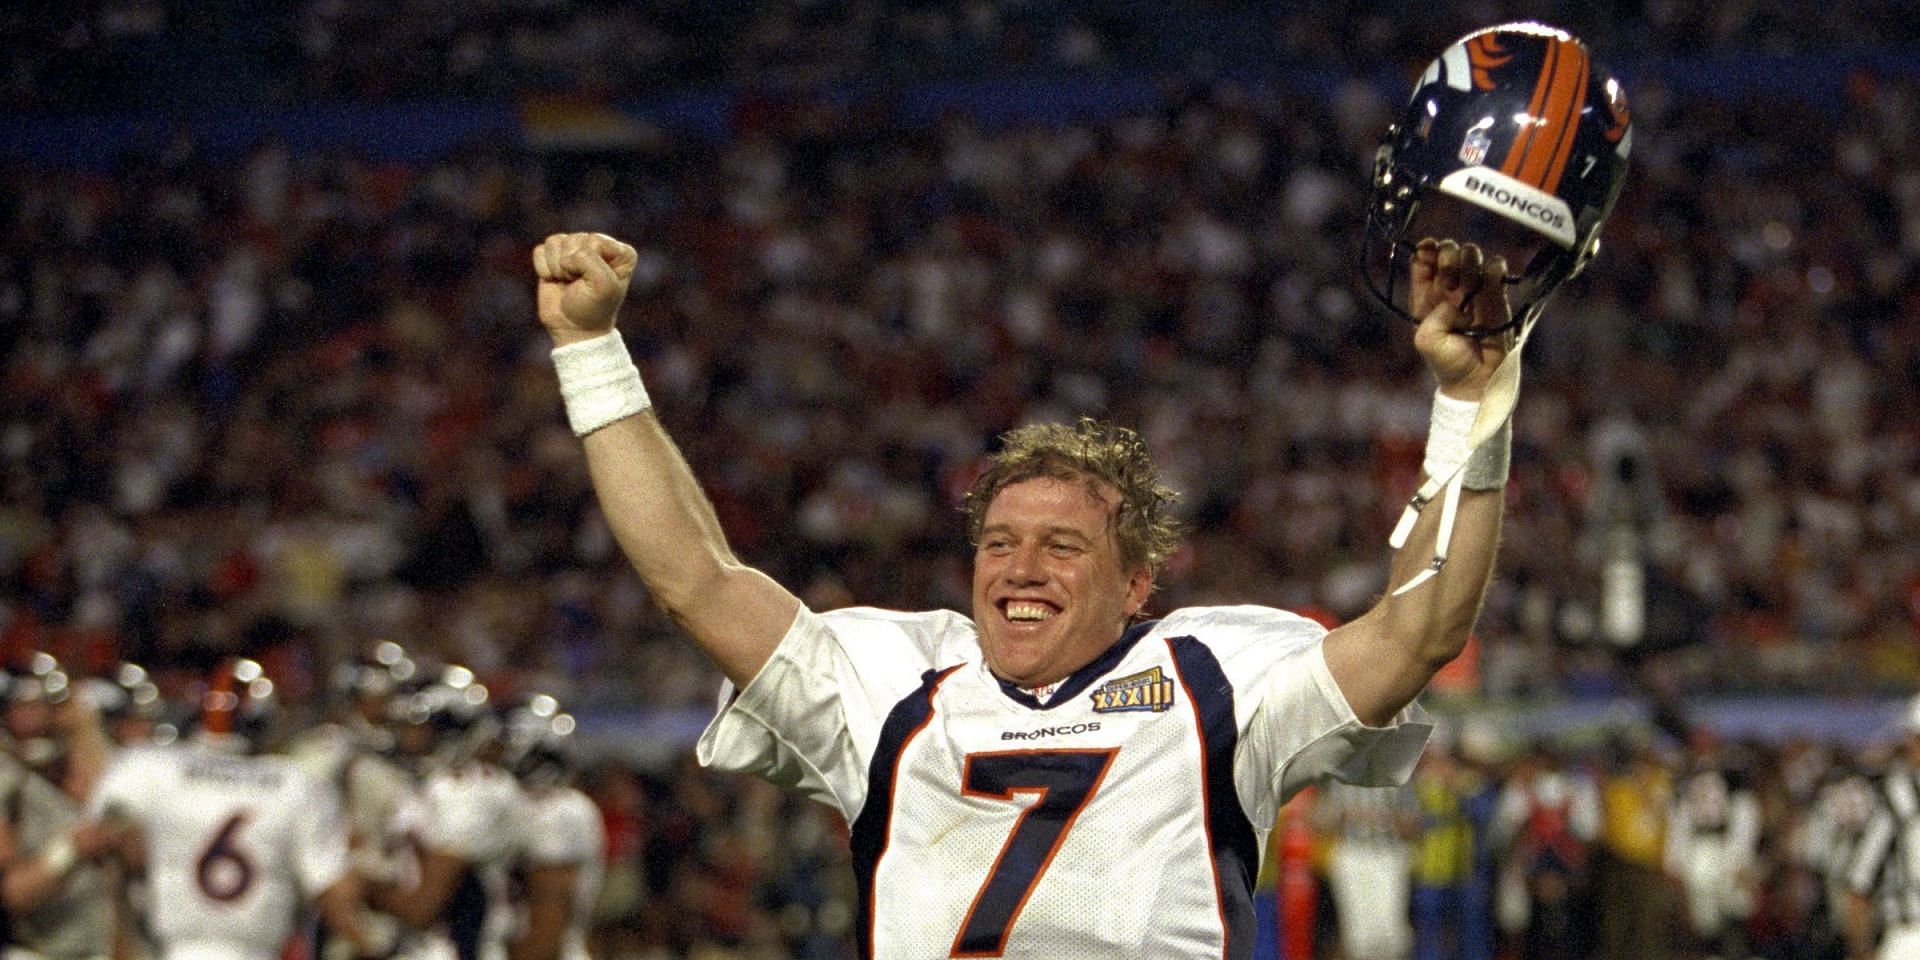 John Elway is considered the greatest Bronco of all time